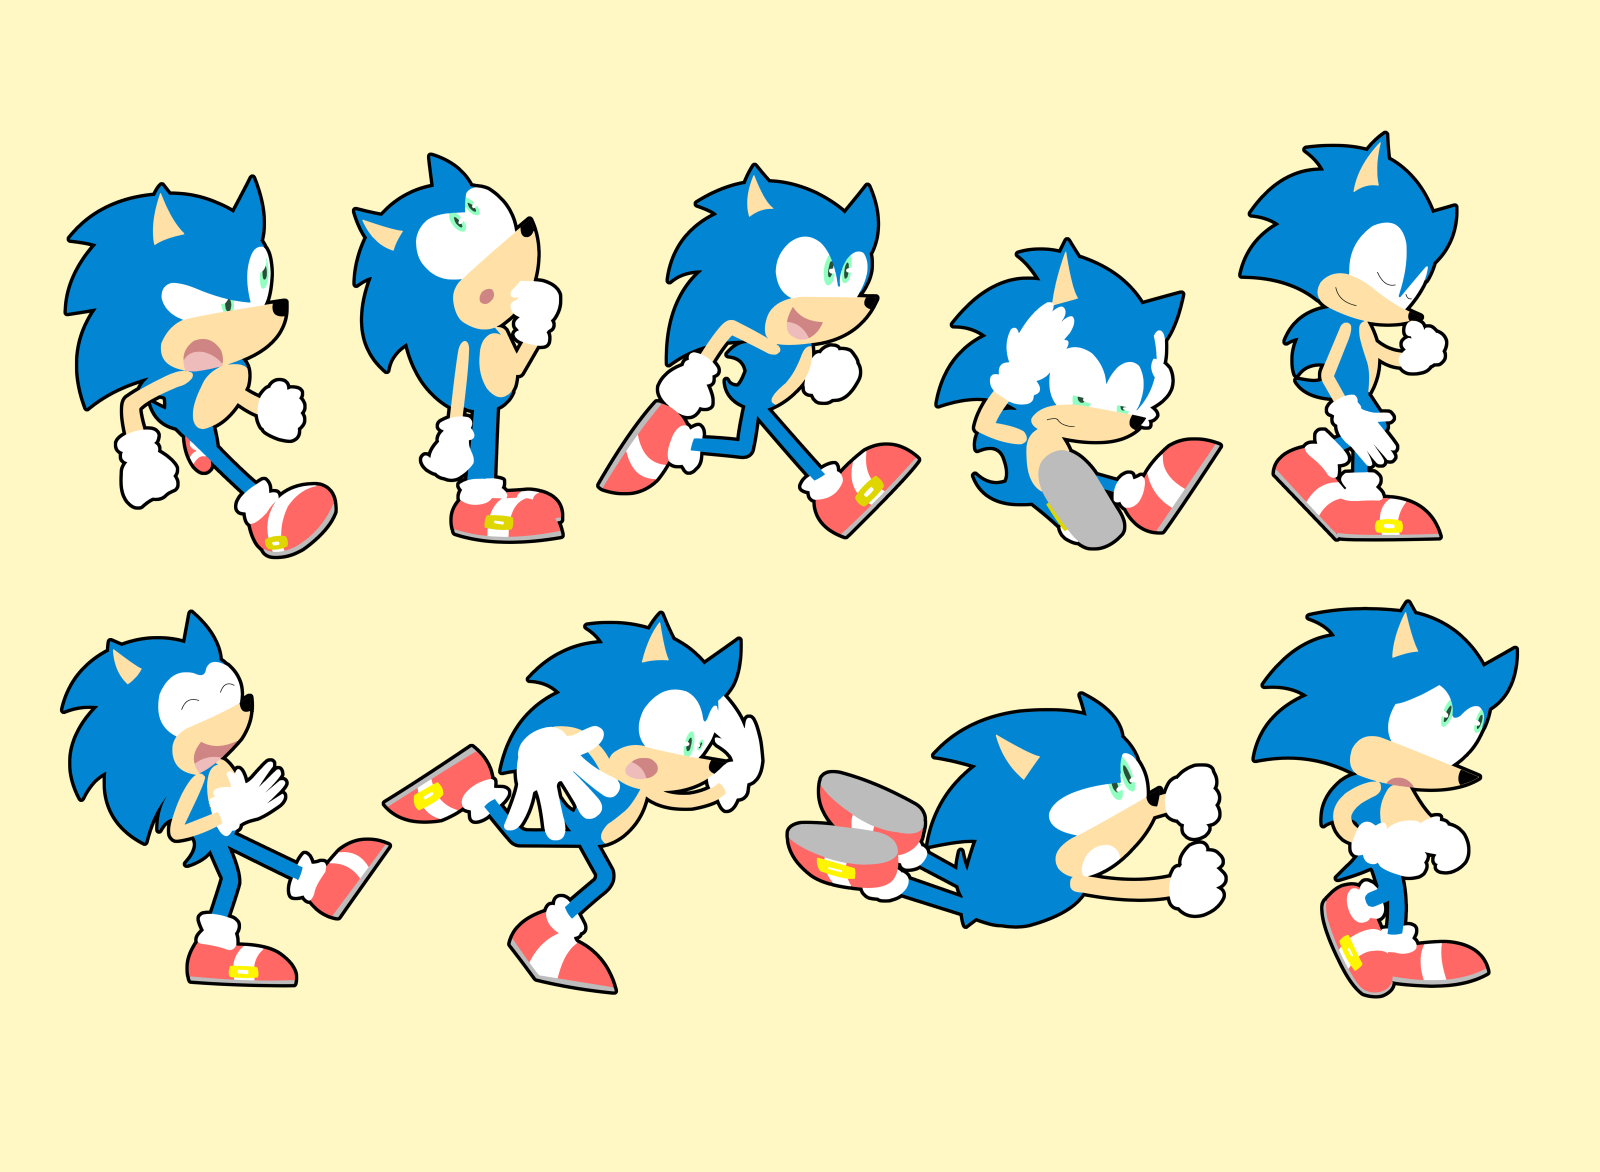 Sonic Character Pose Sheet by Jake Rankin on Dribbble